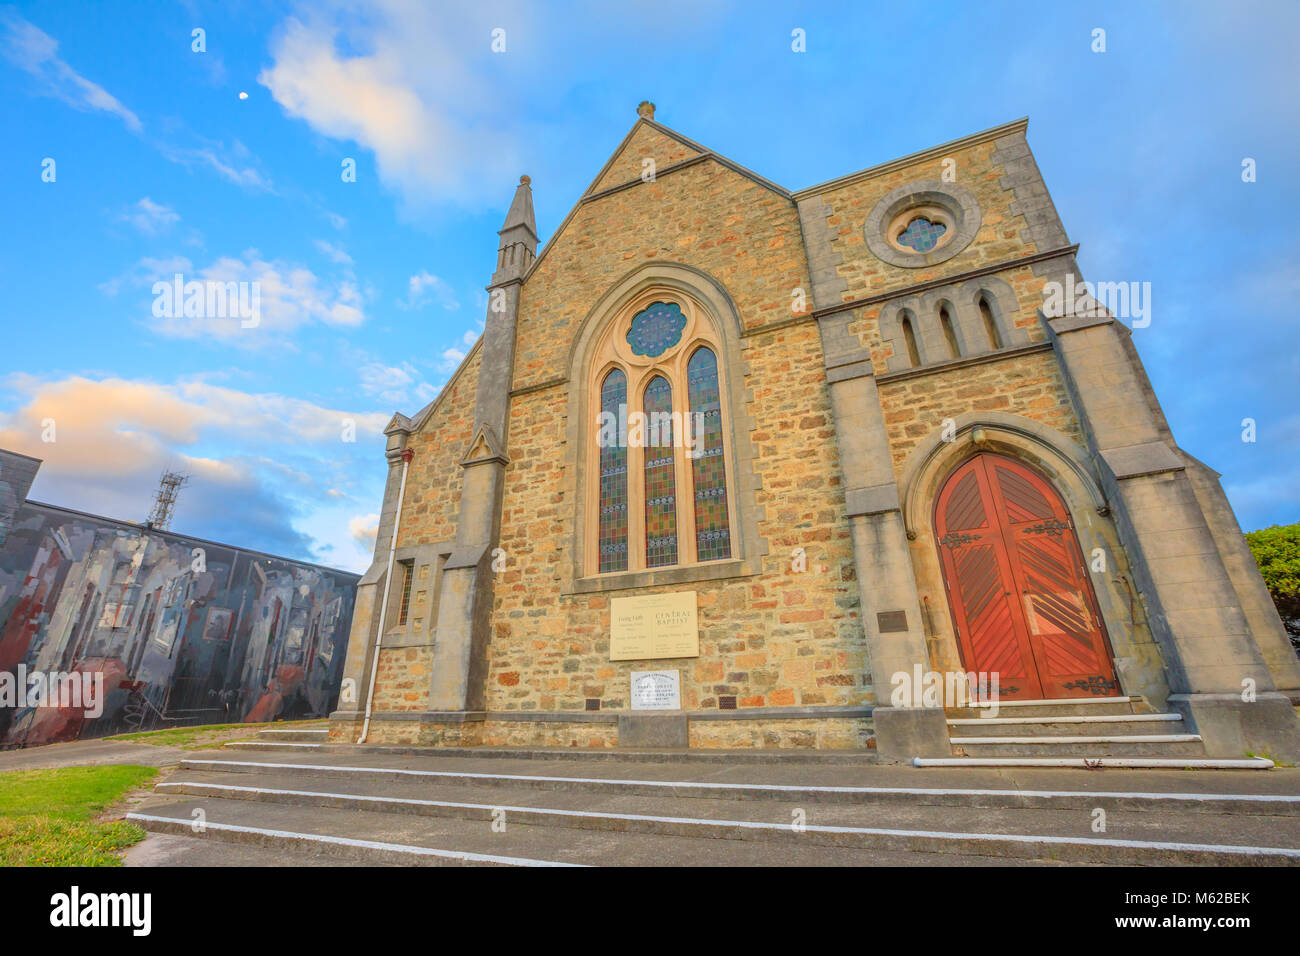 Albany, Australia - Dec 28, 2017: facade of Scots Uniting Church or Scots Presbyterian Church, in Victorian Gothic style, on York Street, Albany, Great Southern region of Western Australia at twilight Stock Photo